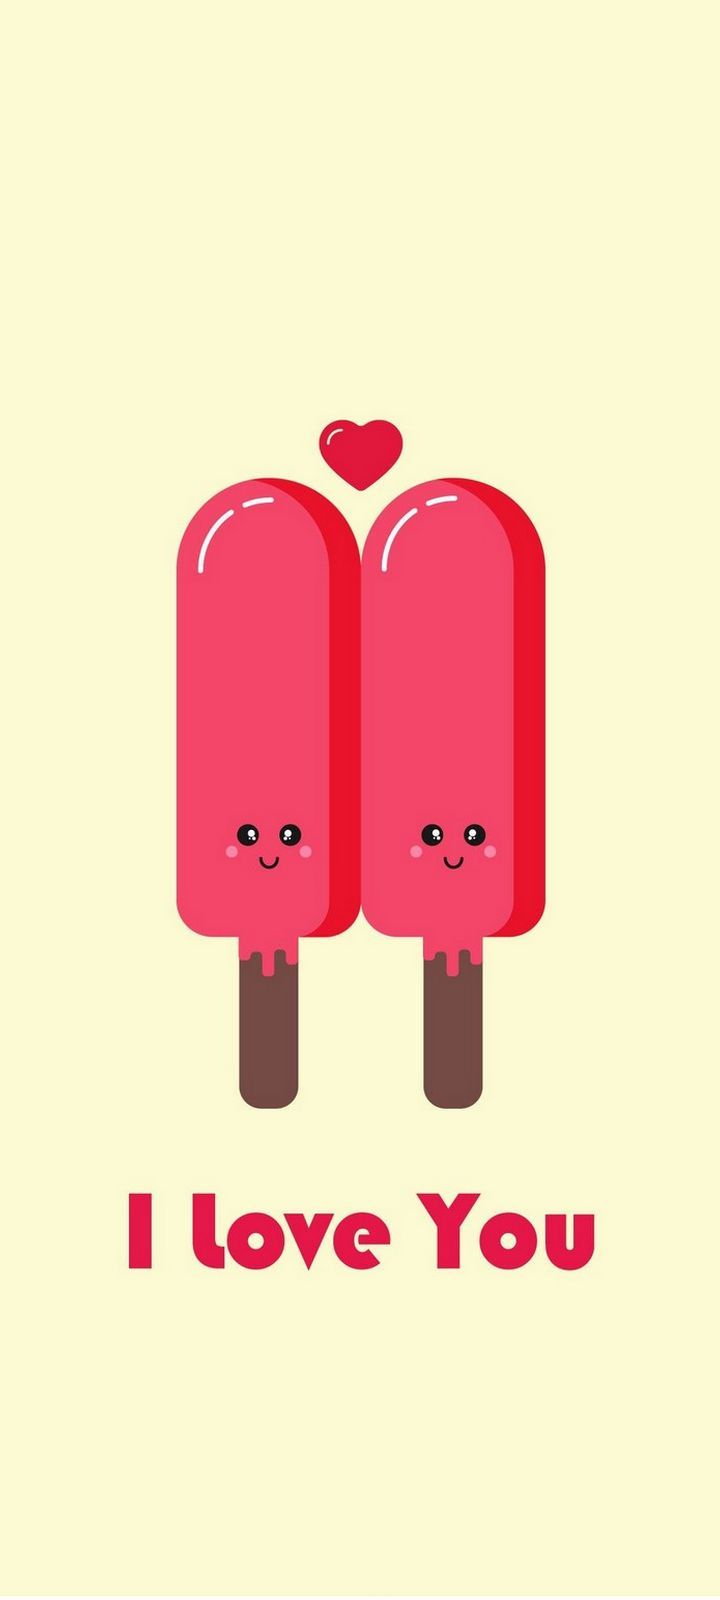 Ice Cream Love Wallpaper - [720x1600] download and share beautiful image in best available resolution. Love wallpaper, Wallpaper, Movie night for kids